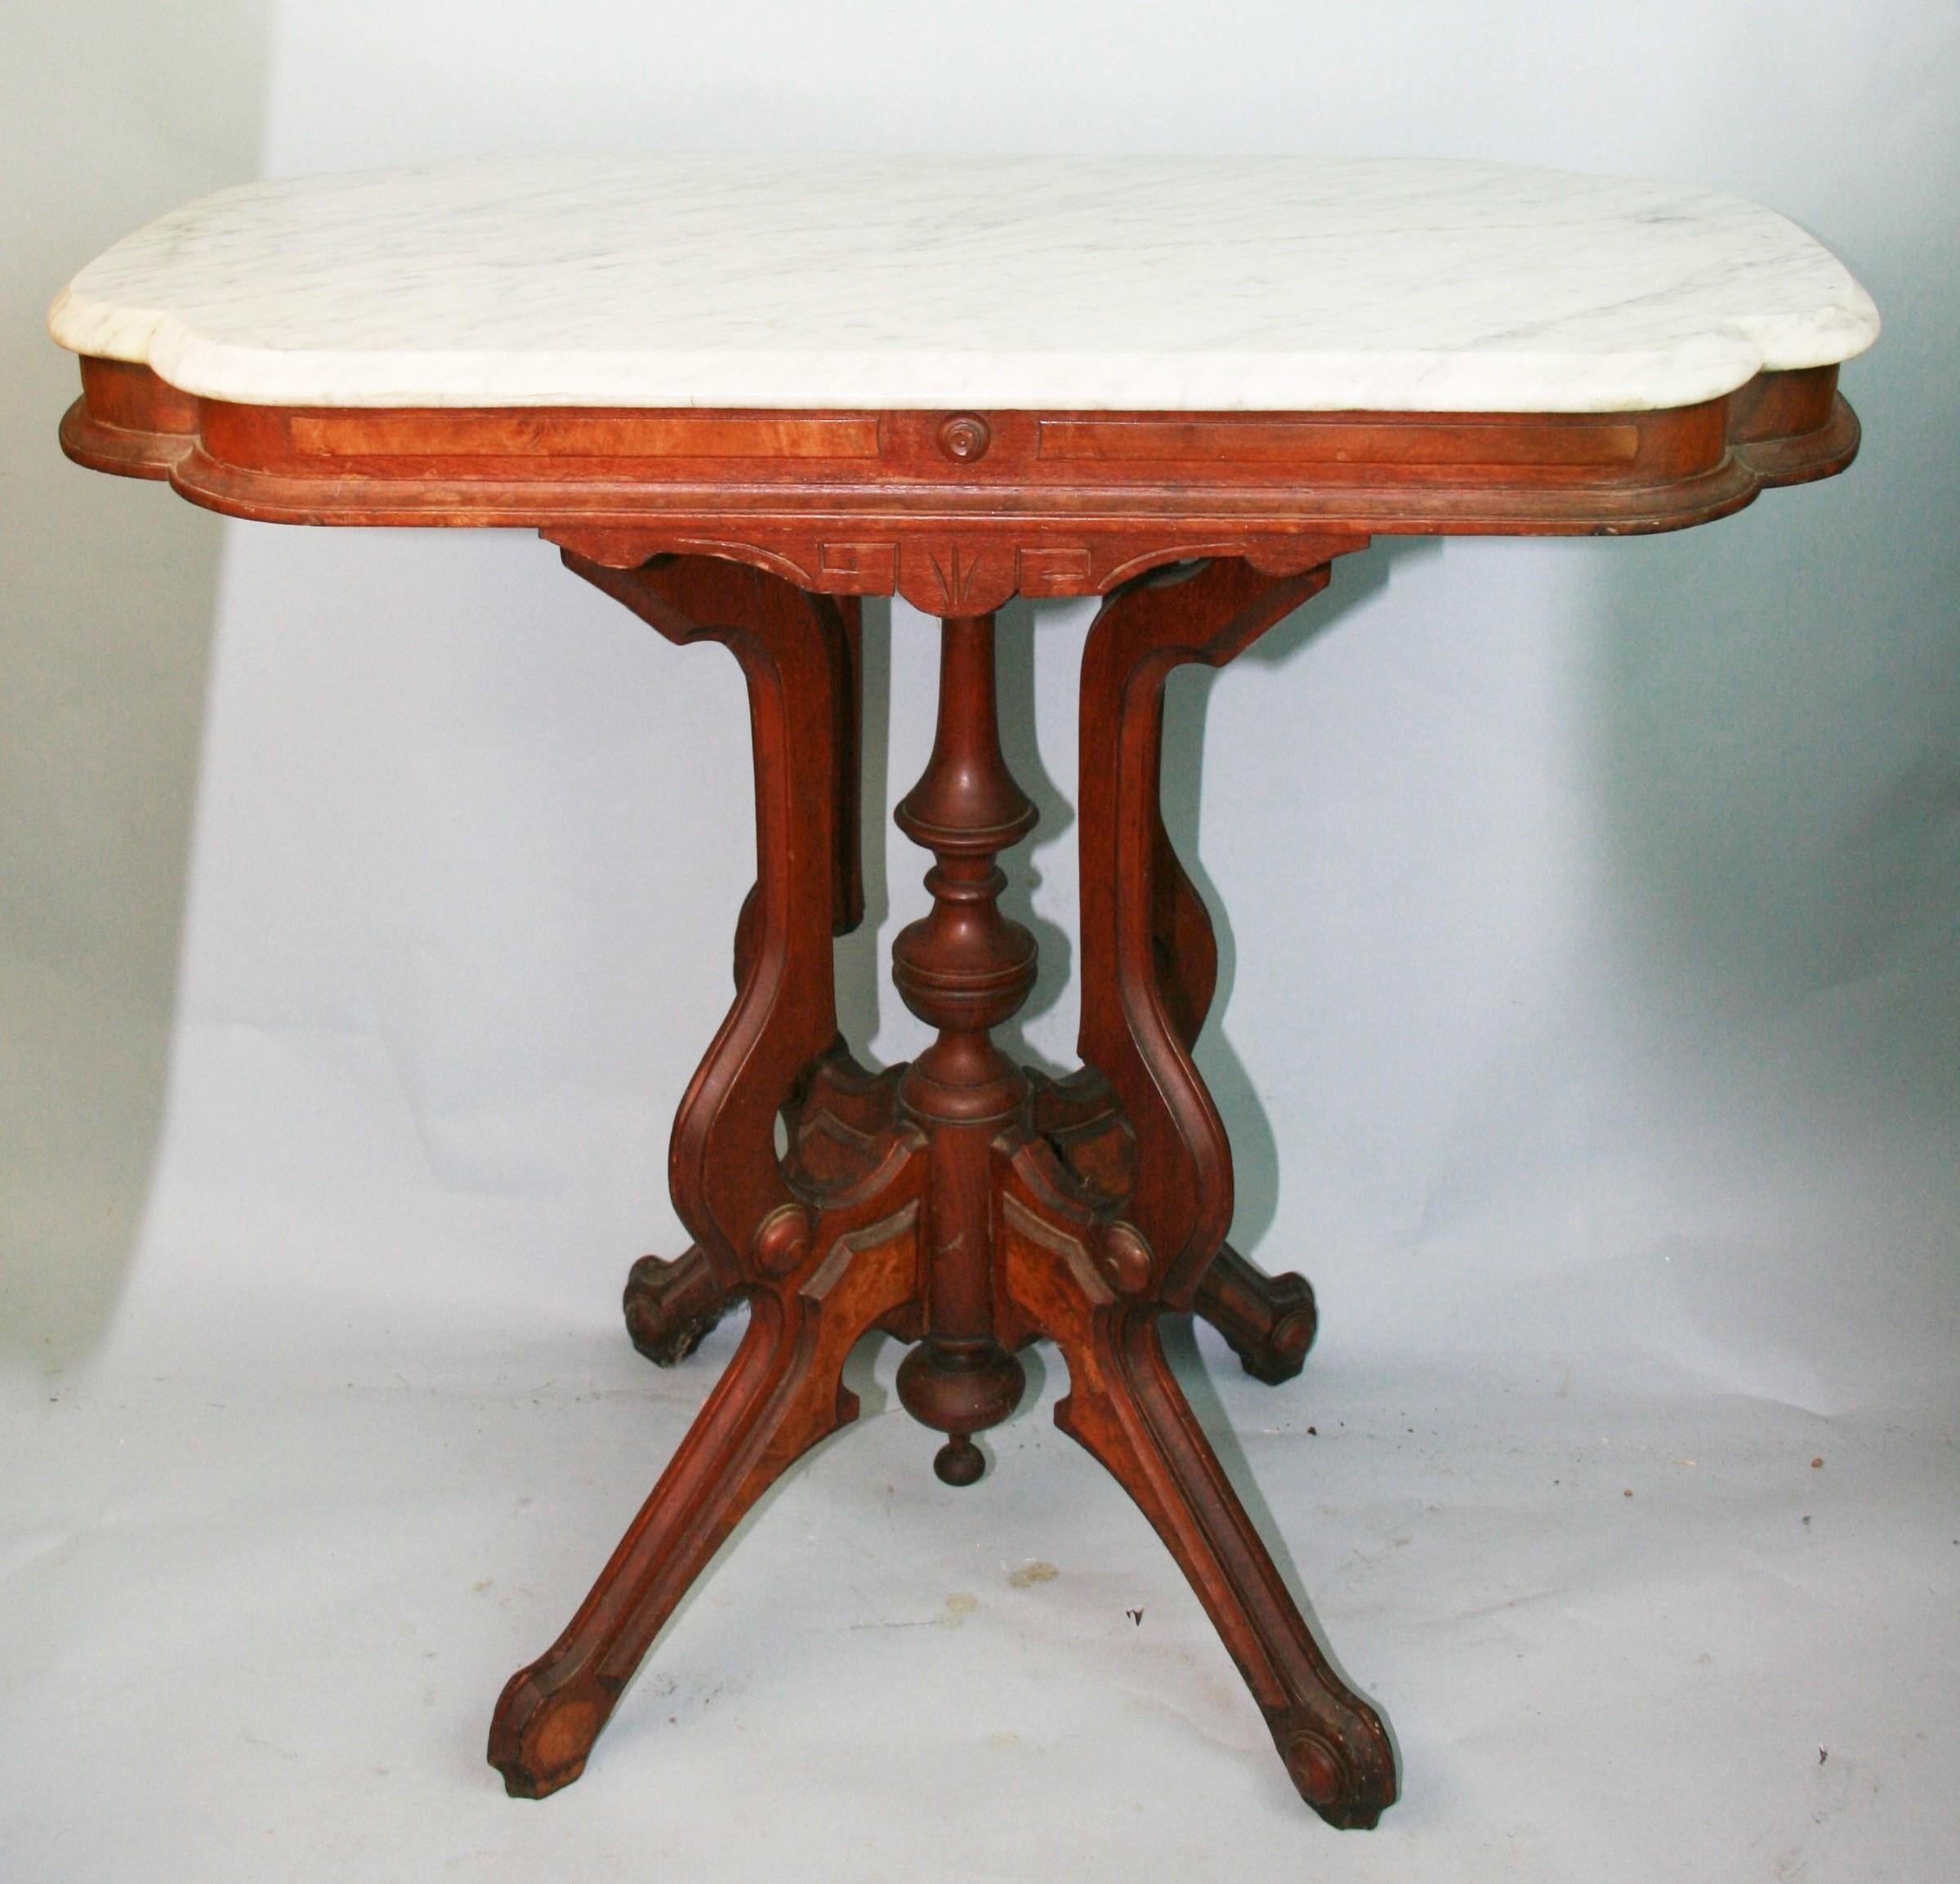 Antique Victorian Eastlake Walnut and Burl carved marble parlor side table
A grand rectangular marble top and turned center post surrounded by carved panels
Missing 2 carved medallions on foot
Circa 1890